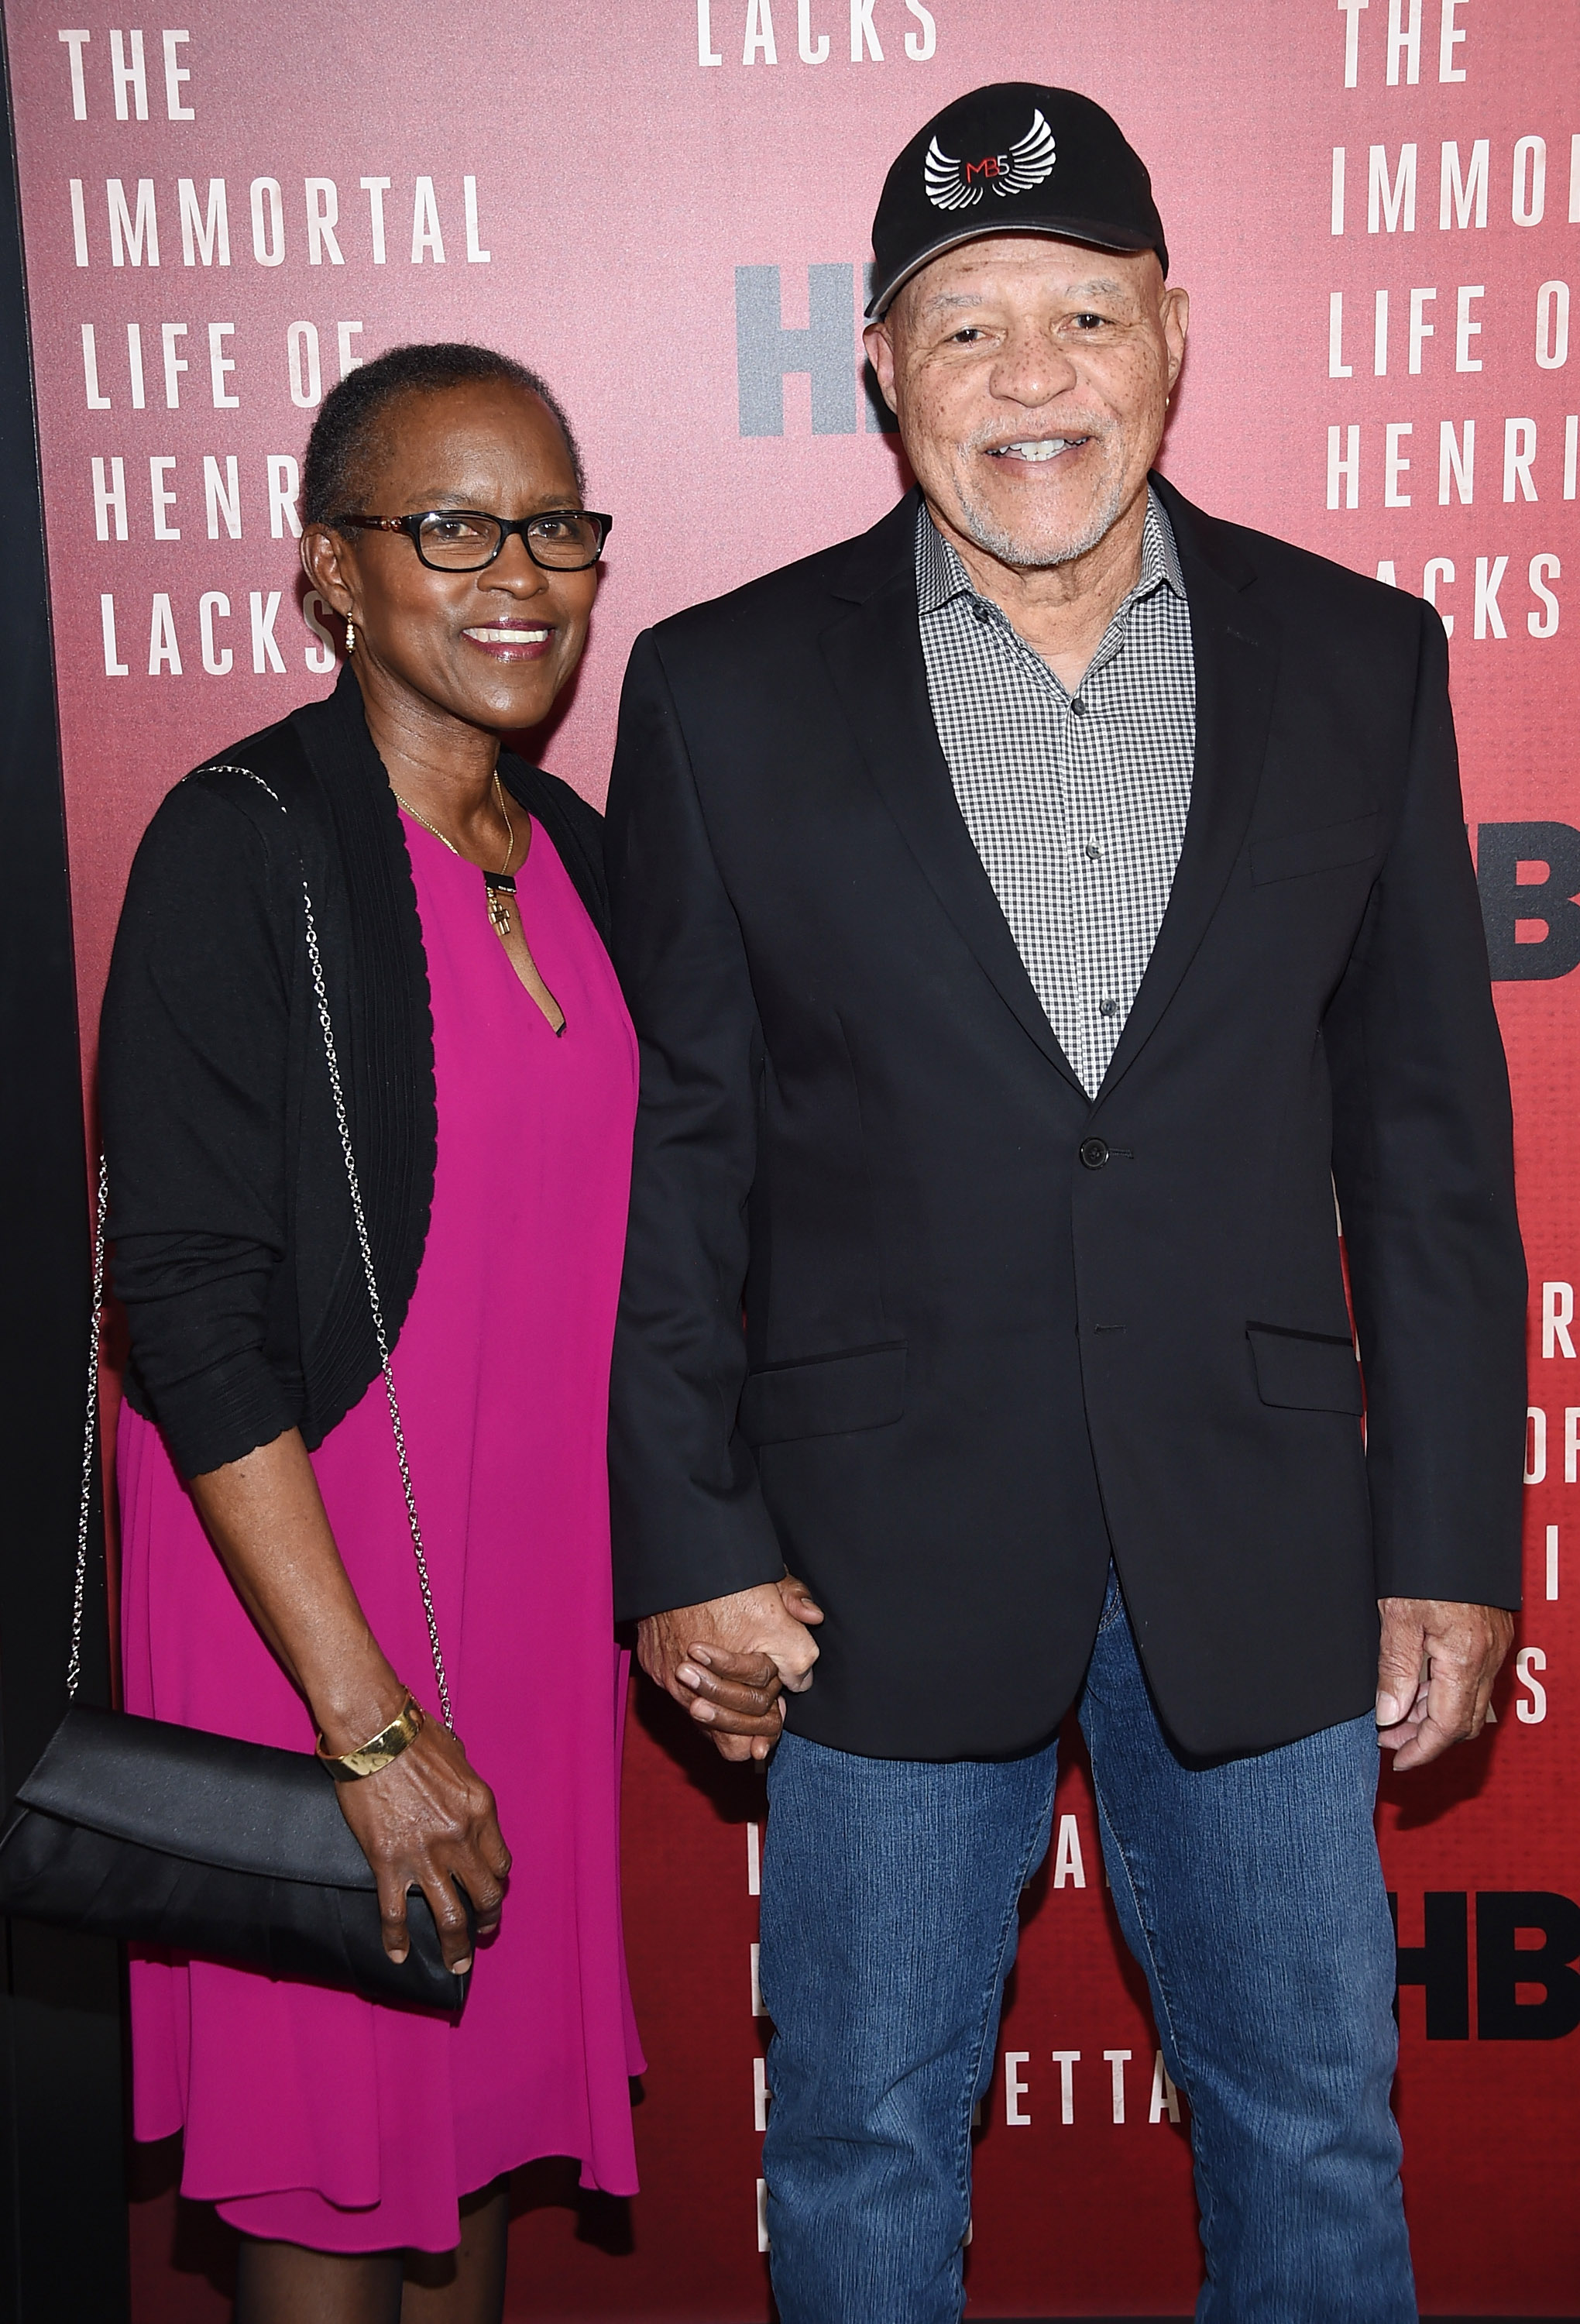 Judy and John Beasley at the "The Immortal Life of Henrietta Lacks" premiere on April 18, 2017, in New York City. | Source: Getty Images